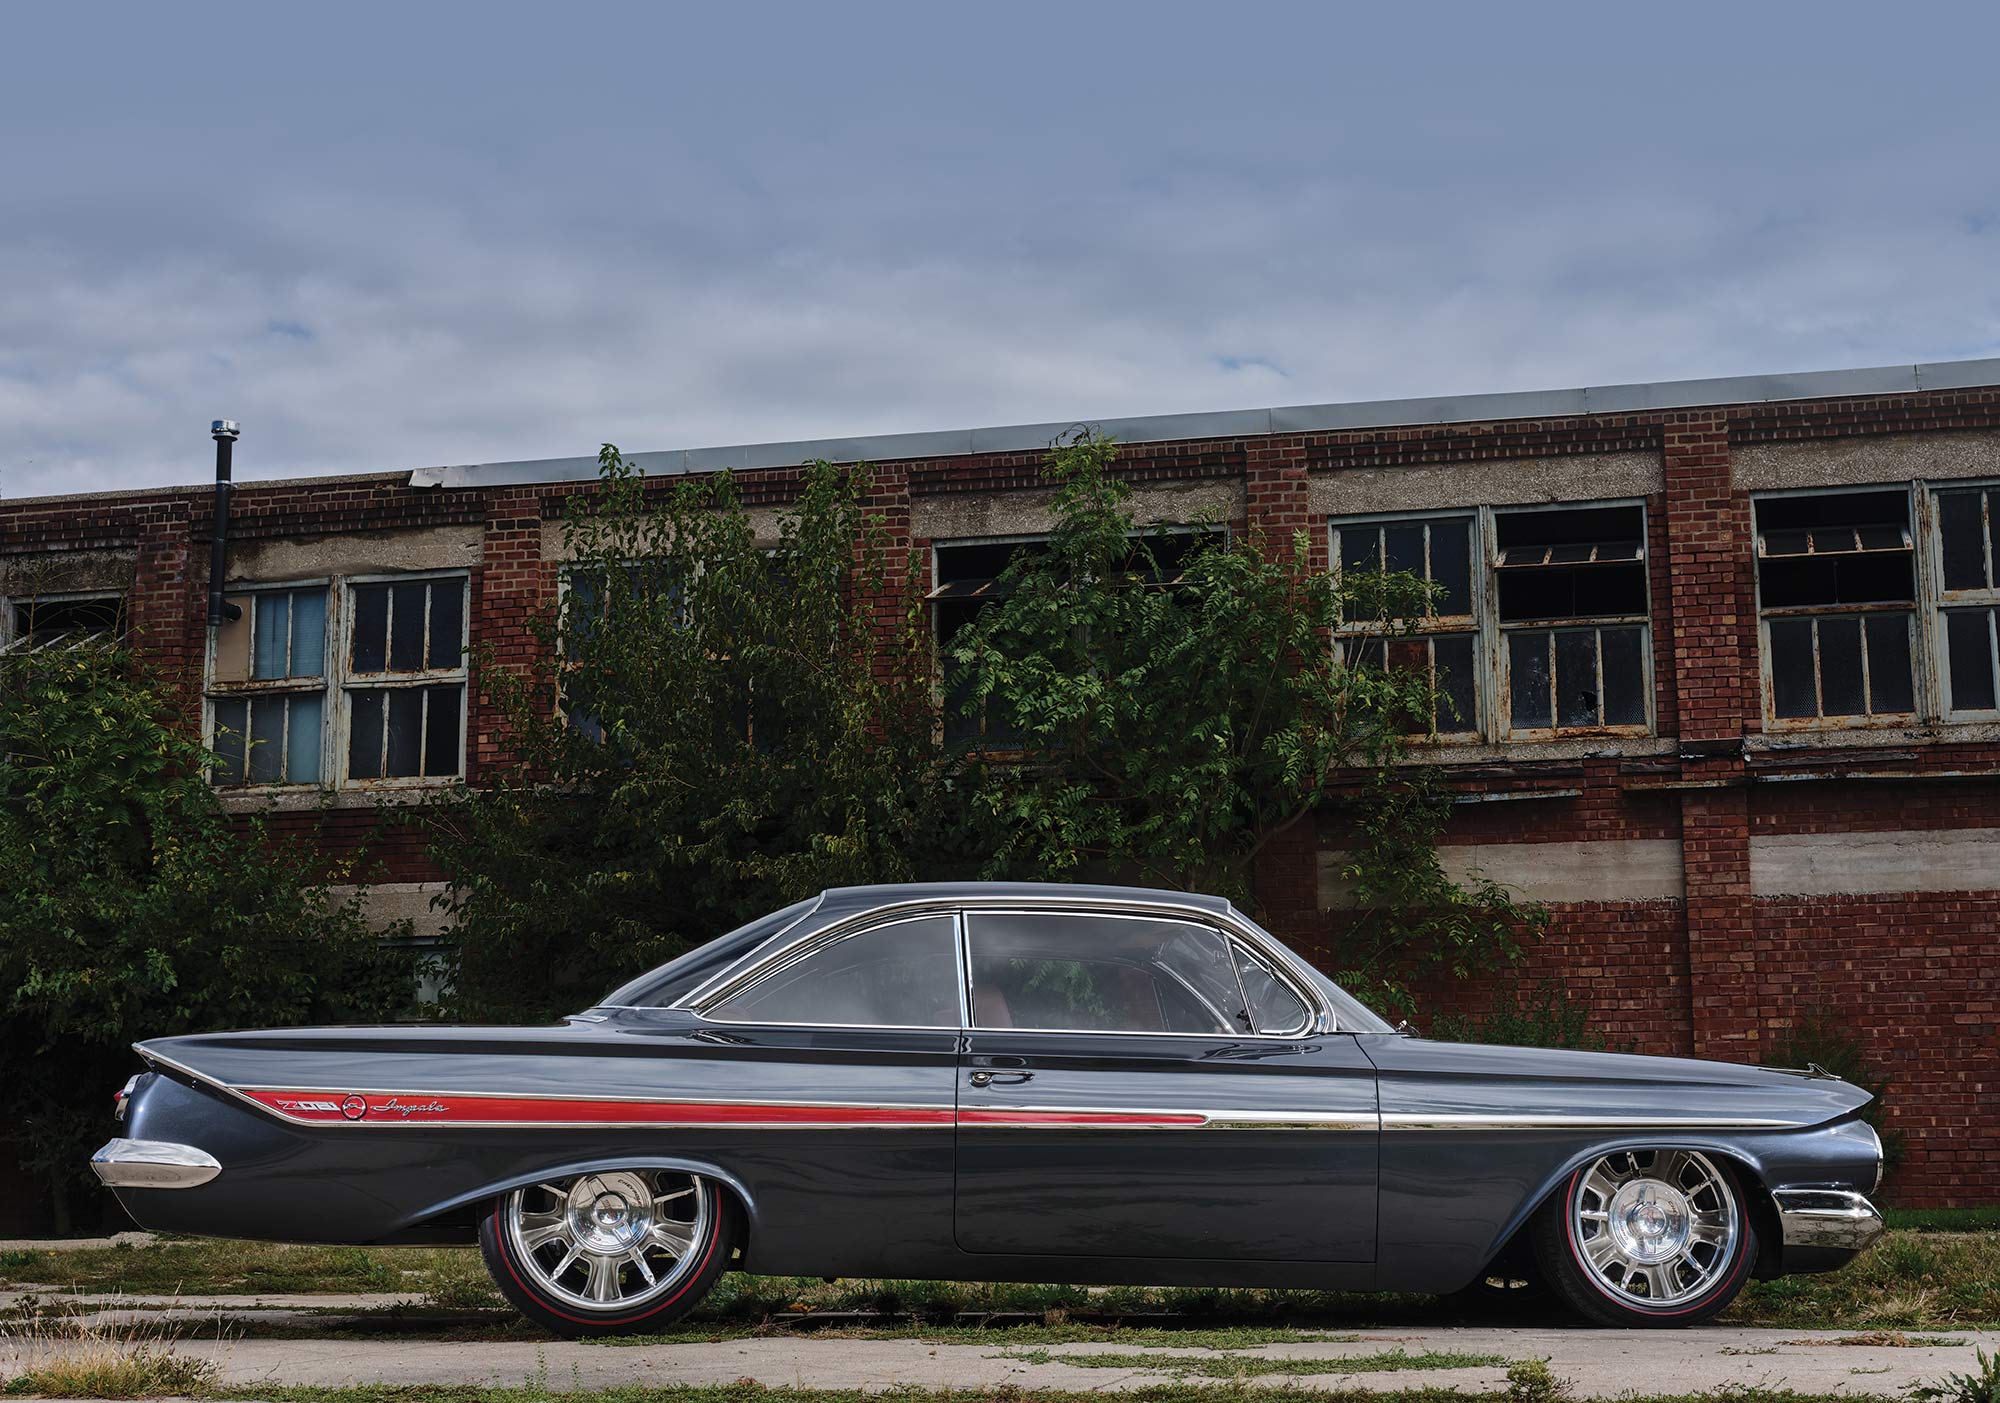 '61 Chevy Impala side profile with a brick building behind